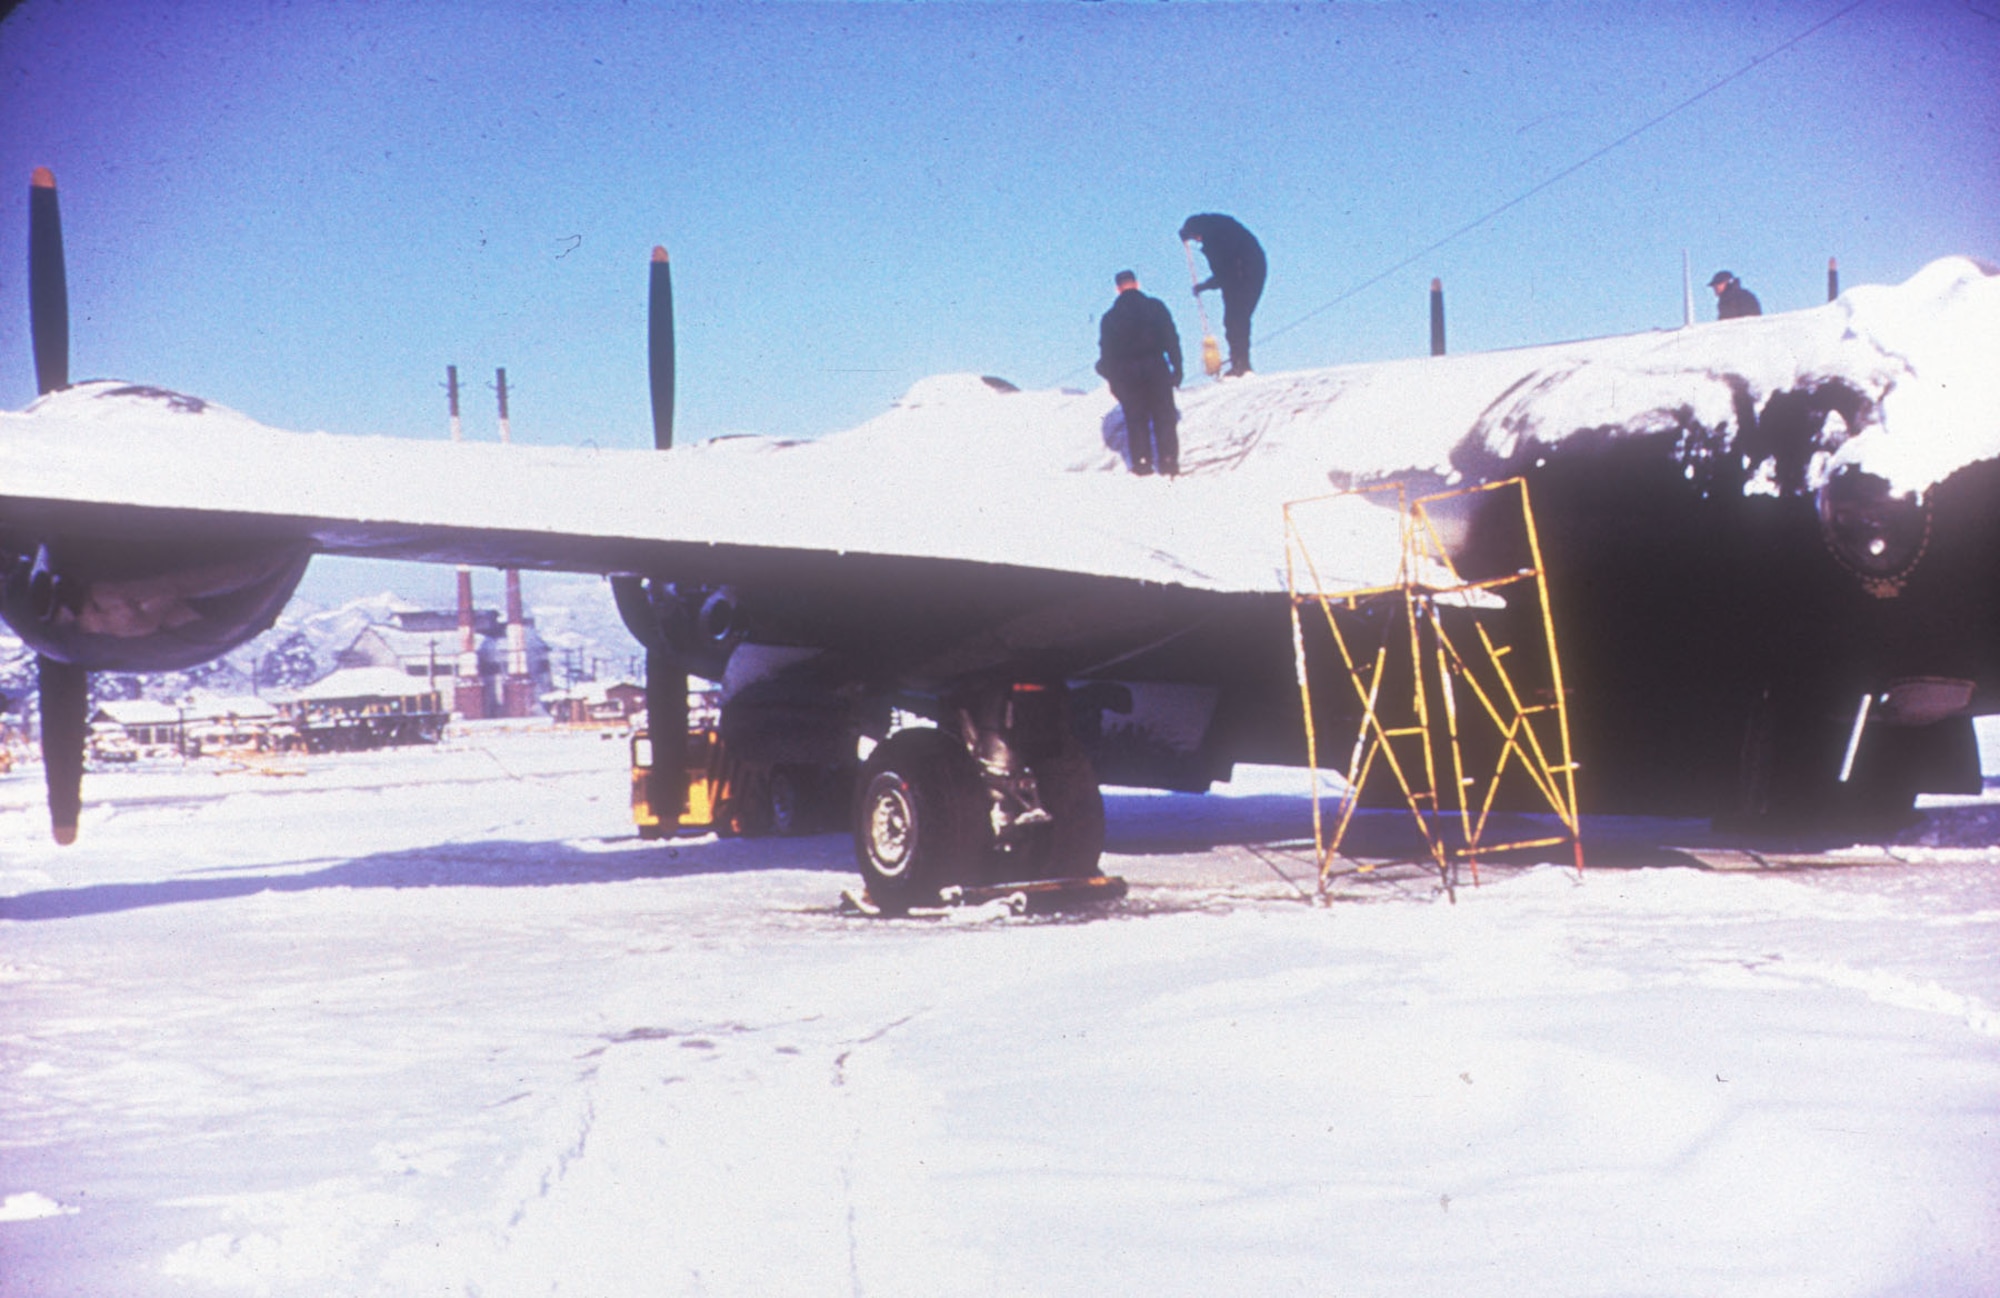 Sometimes mission preparation involved clearing the previous night's snow off the aircraft. (U.S. Air Force photo)